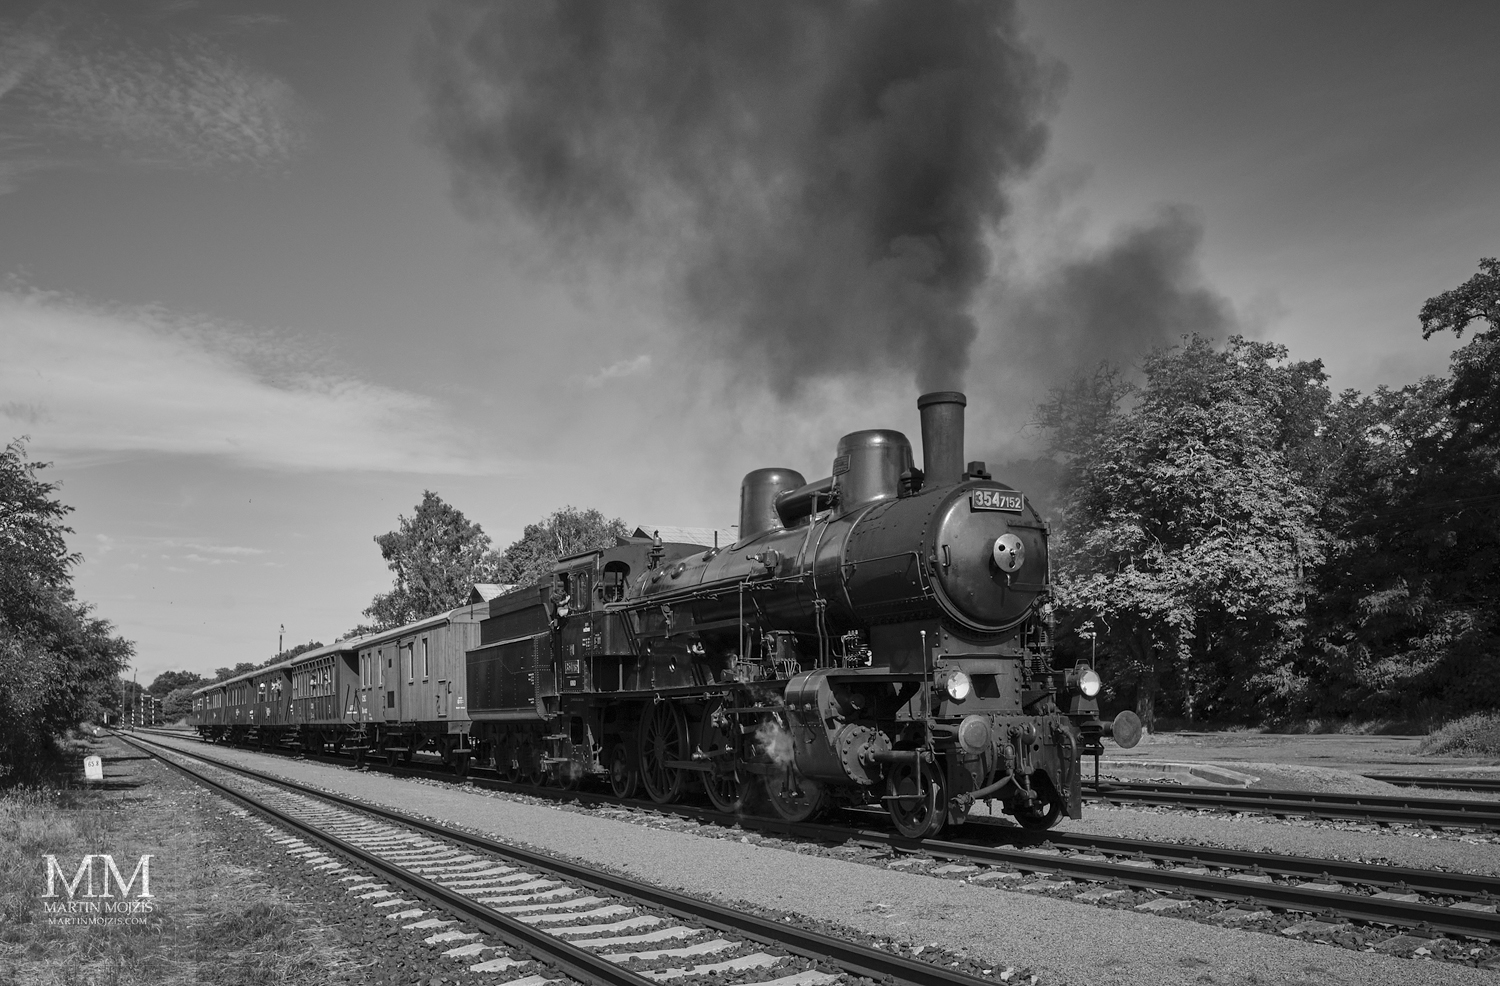 A steam train on the tracks. Fine art photograph TO THE CREEKS, photographed by Martin Mojzis.